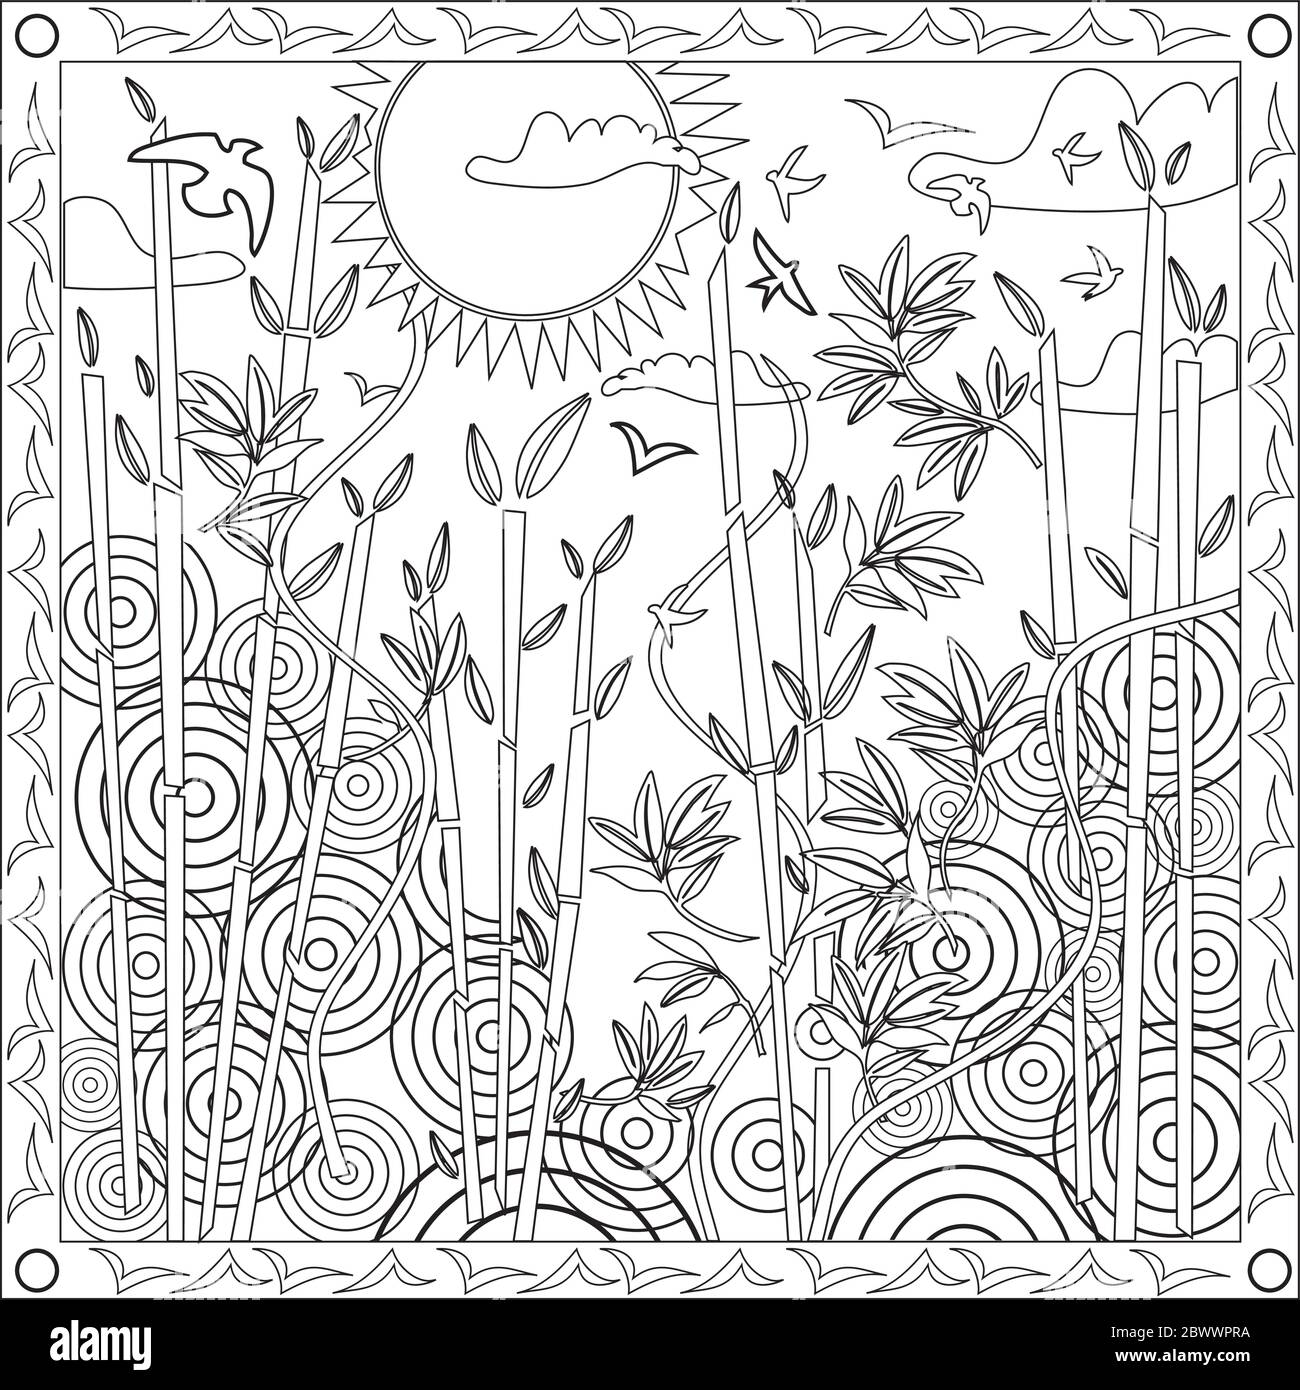 Coloring Page Illustration In Square Format For Adults Bamboo Circles And Sunset Design Stock Vector Image Art Alamy